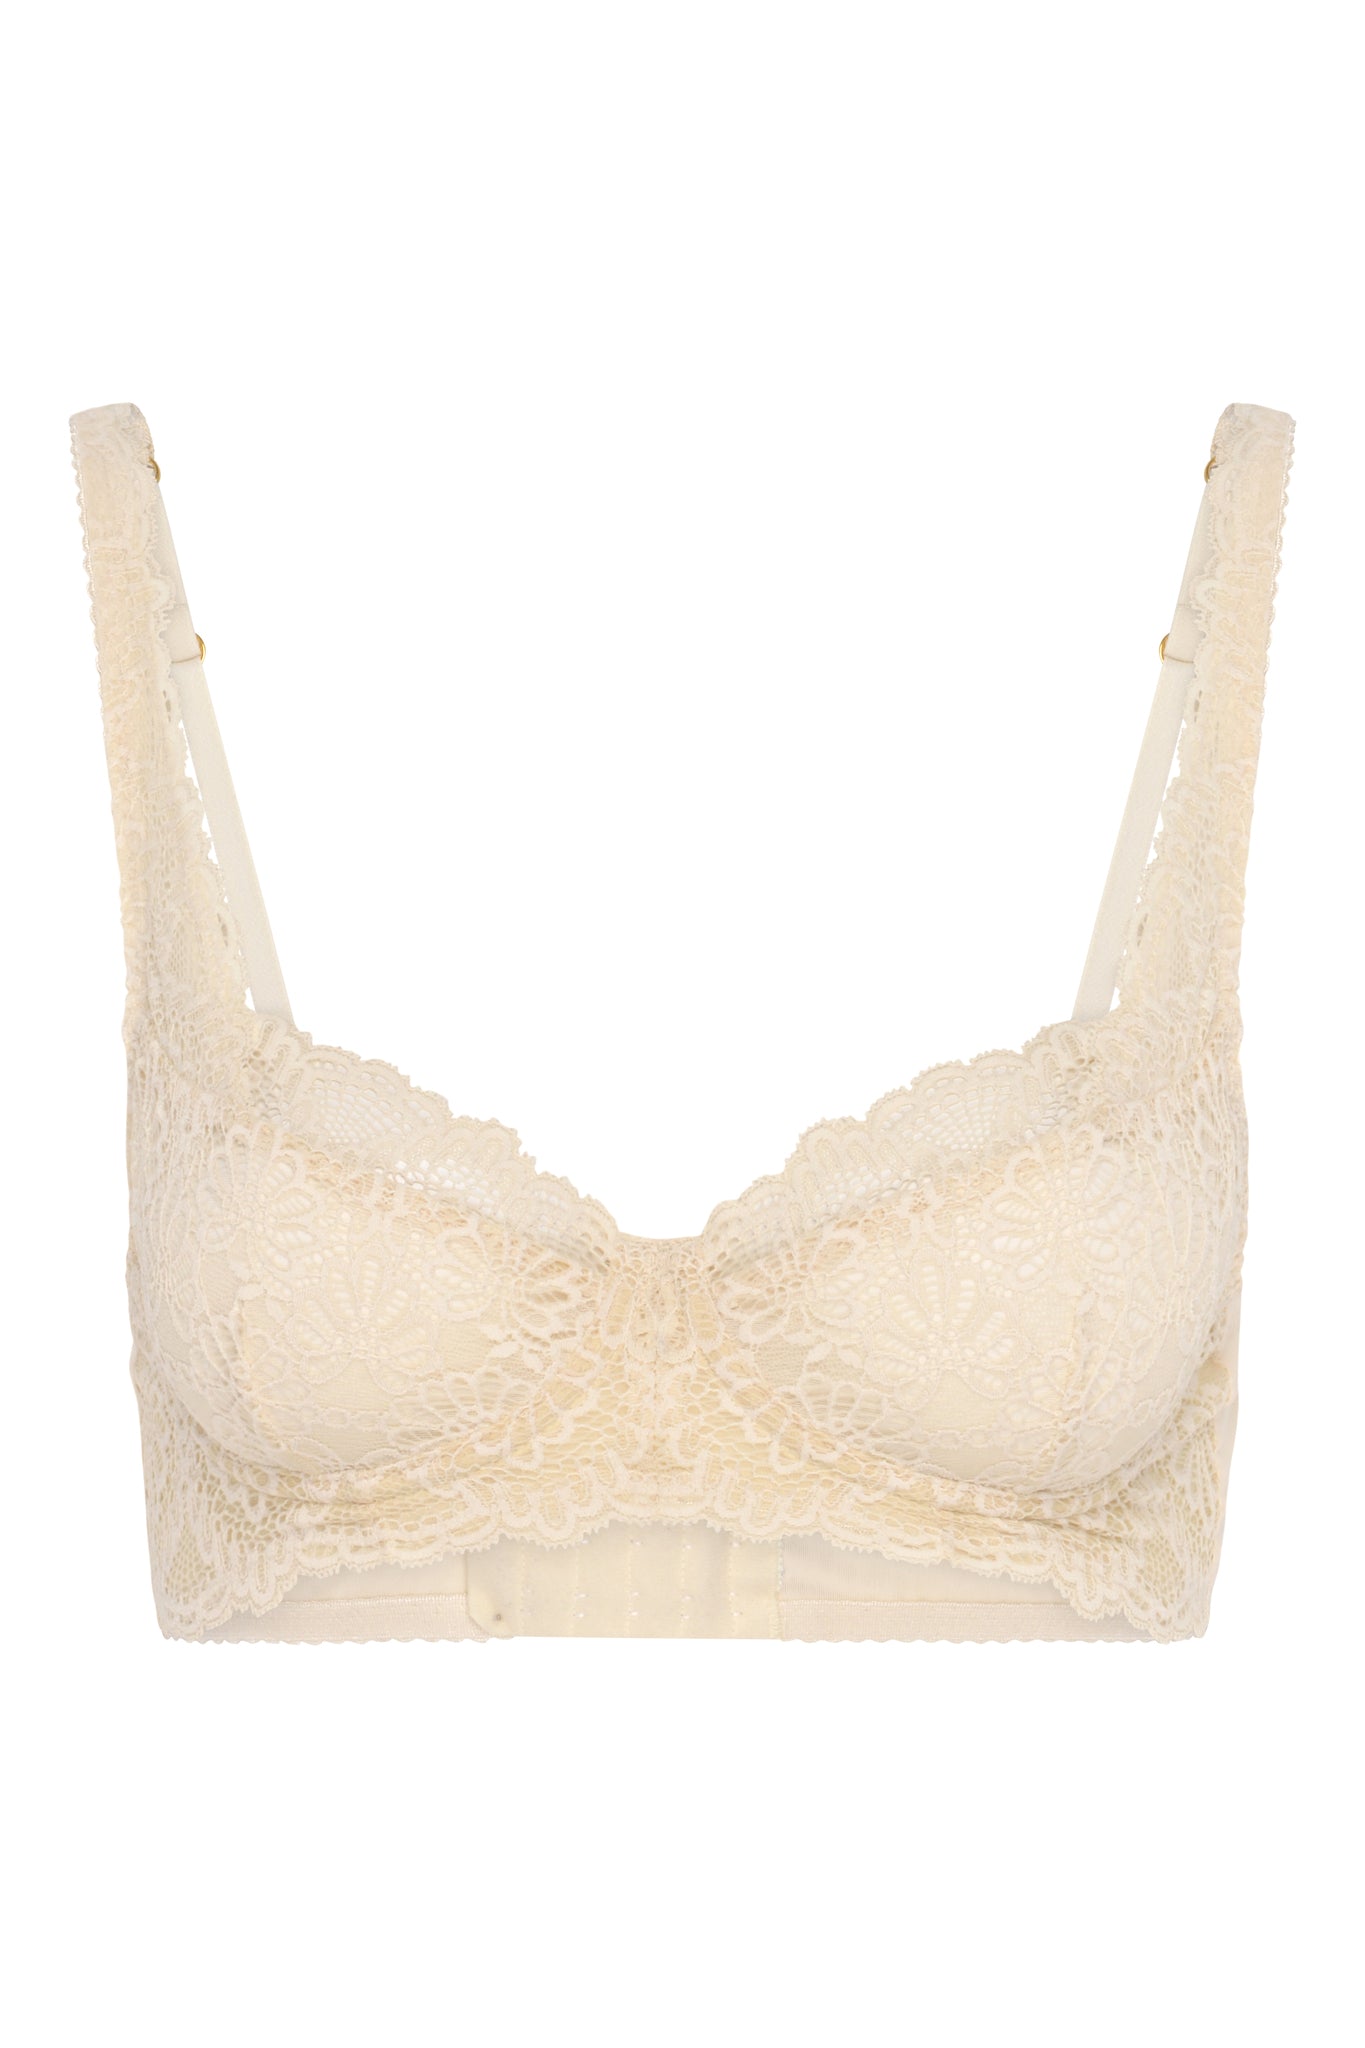 Lace bra with underwire and without padding